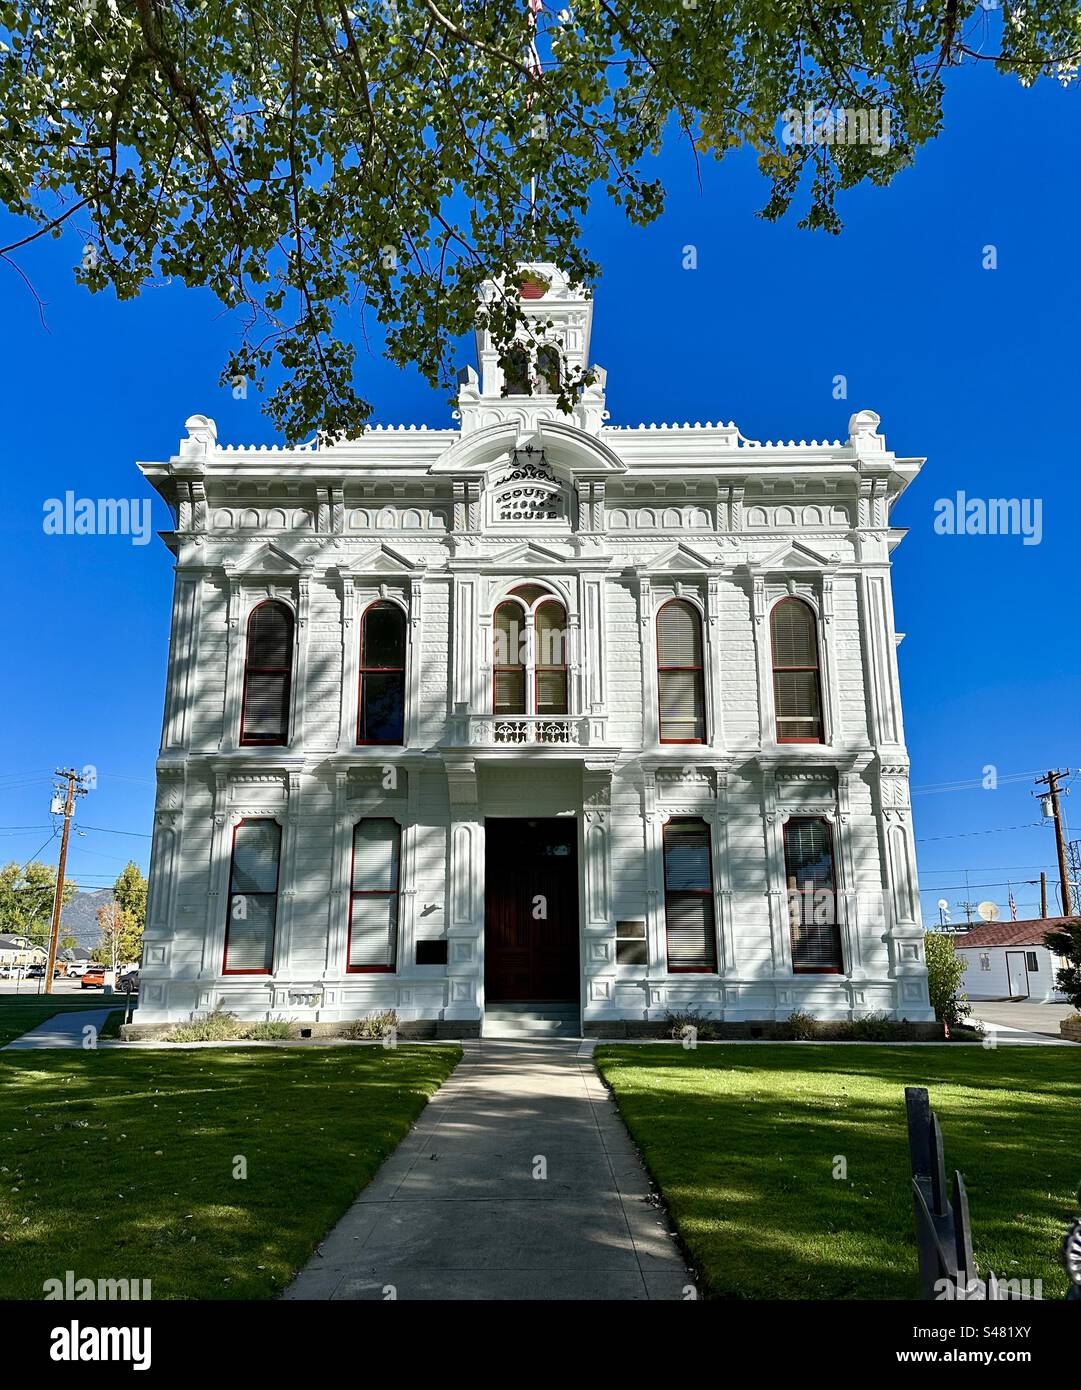 The Mono County Courthouse in Bridgeport, California, is an Italianate-style 1880 building. Stock Photo